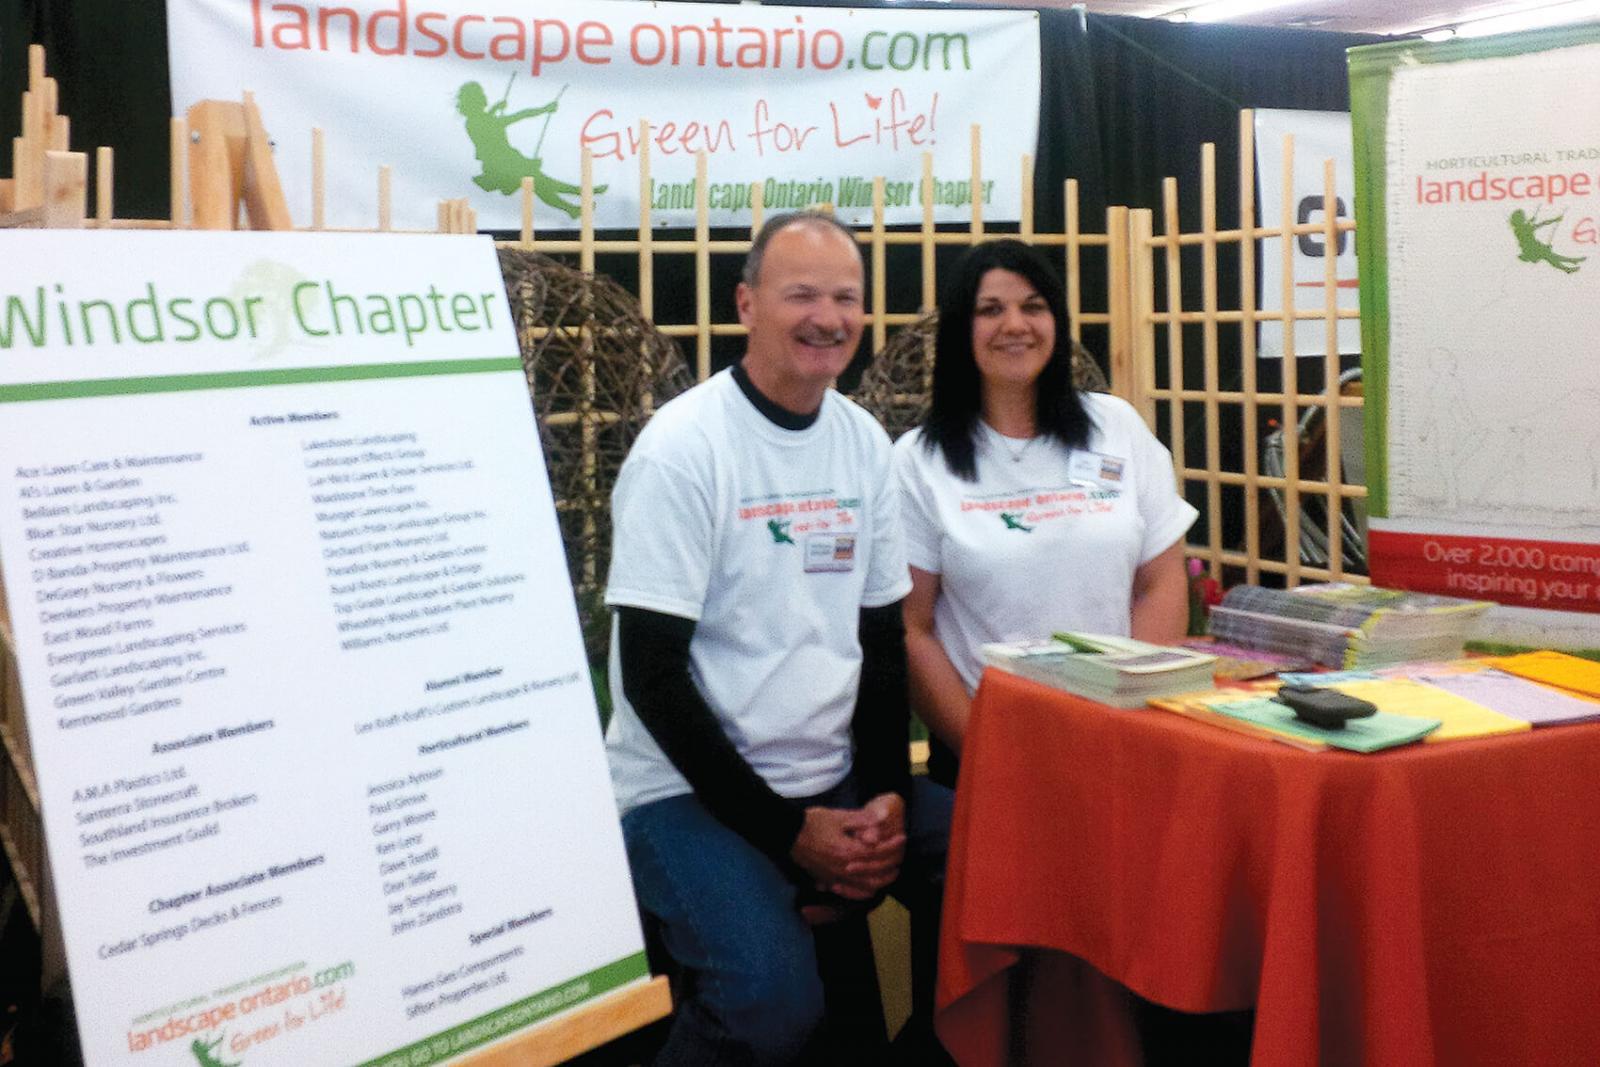 Don Tellier and Jay Rivait handle booth duties for the Windsor Chapter.